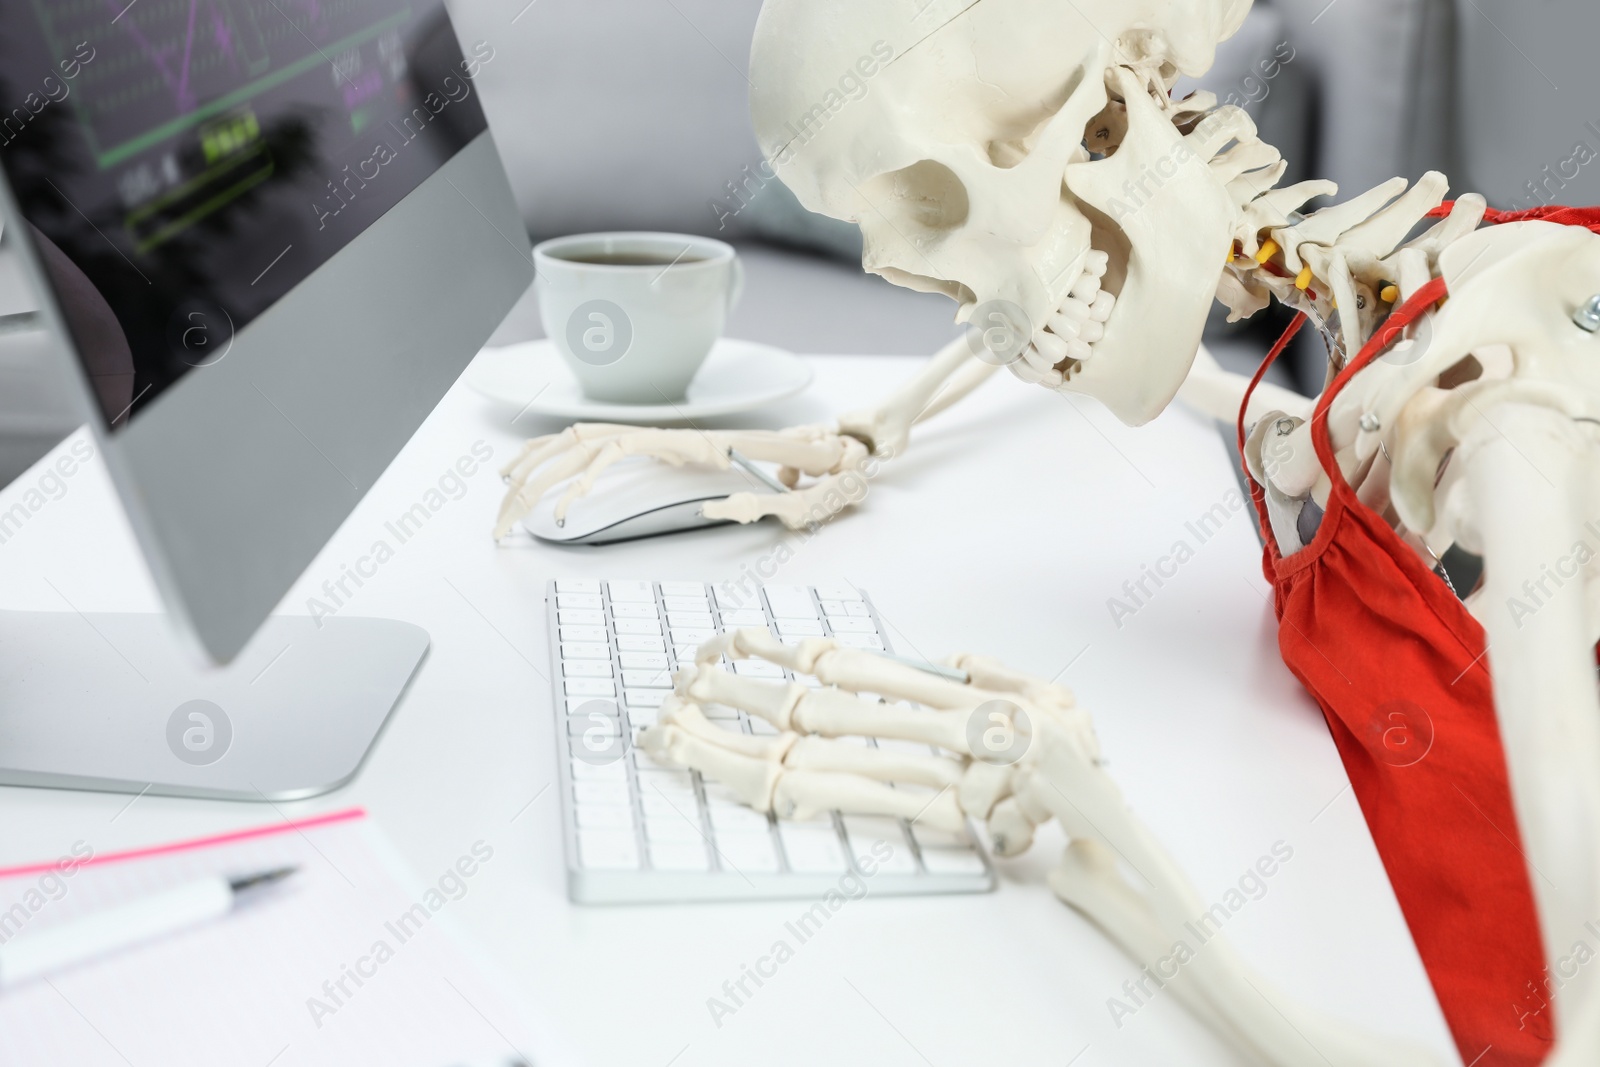 Photo of Human skeleton in red dress using computer at table, closeup